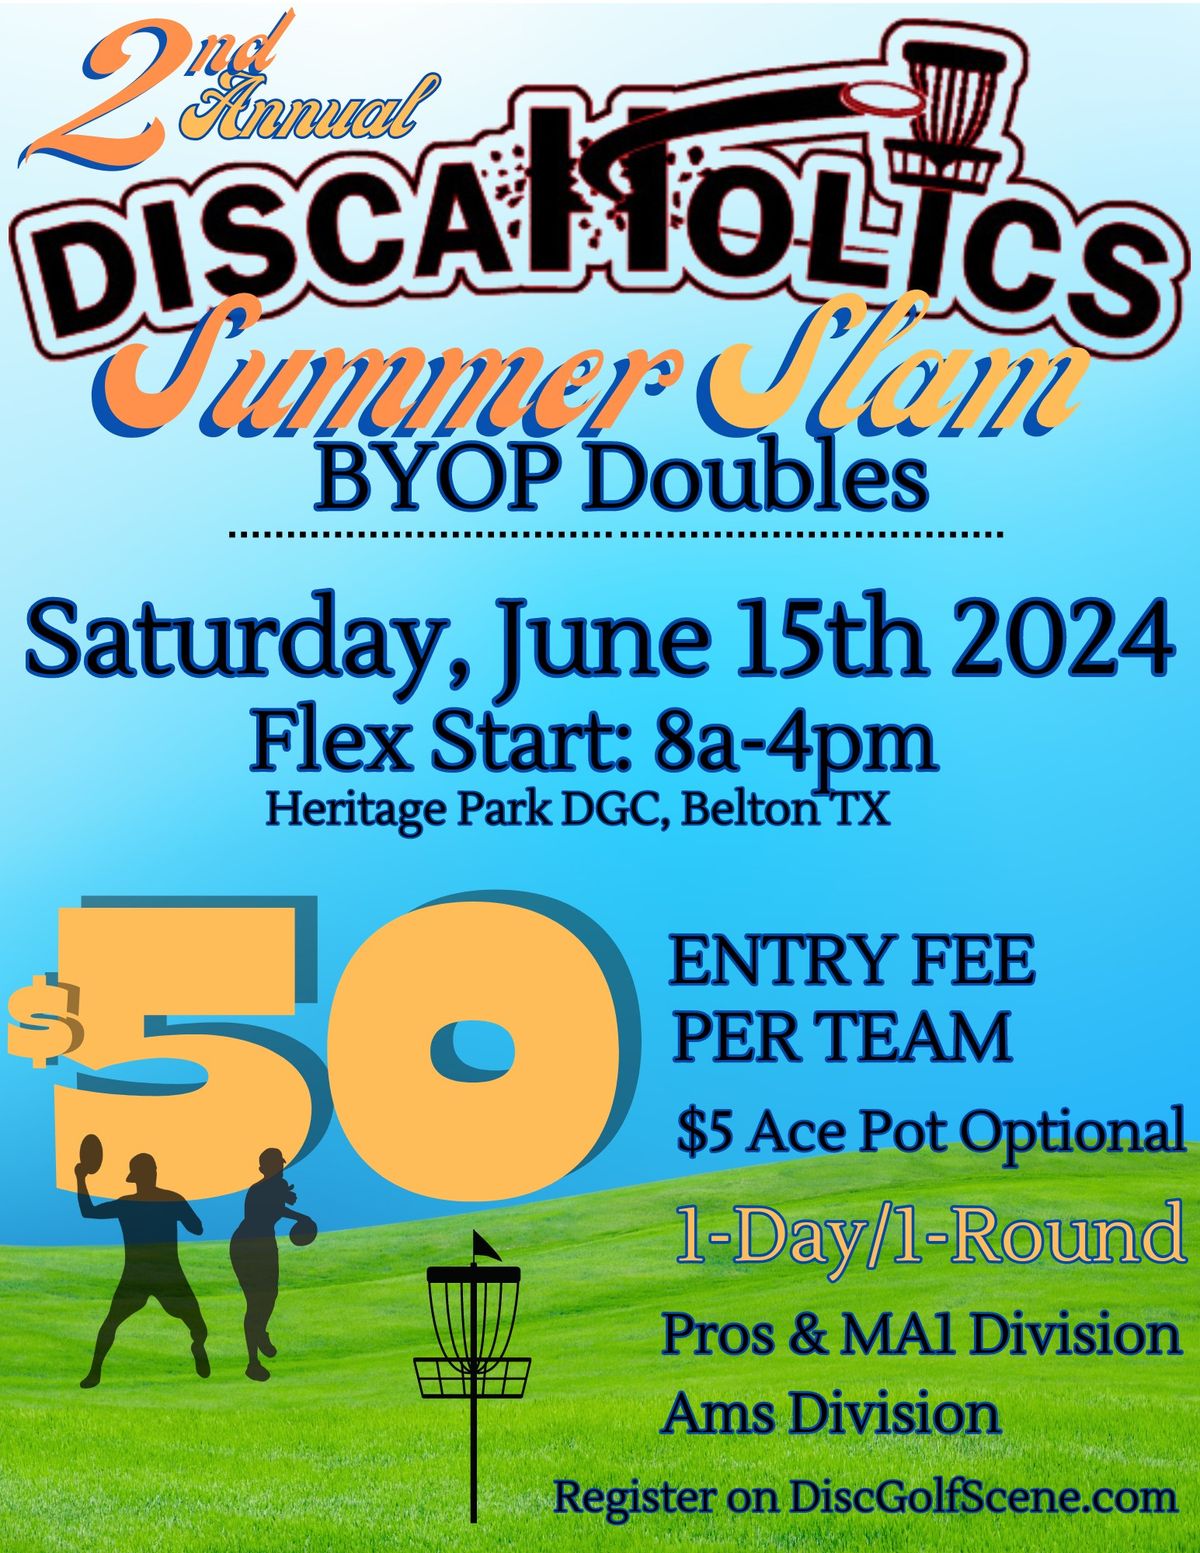 2nd Annual DiscaHolics Summer Slam BYOP Doubles Flex